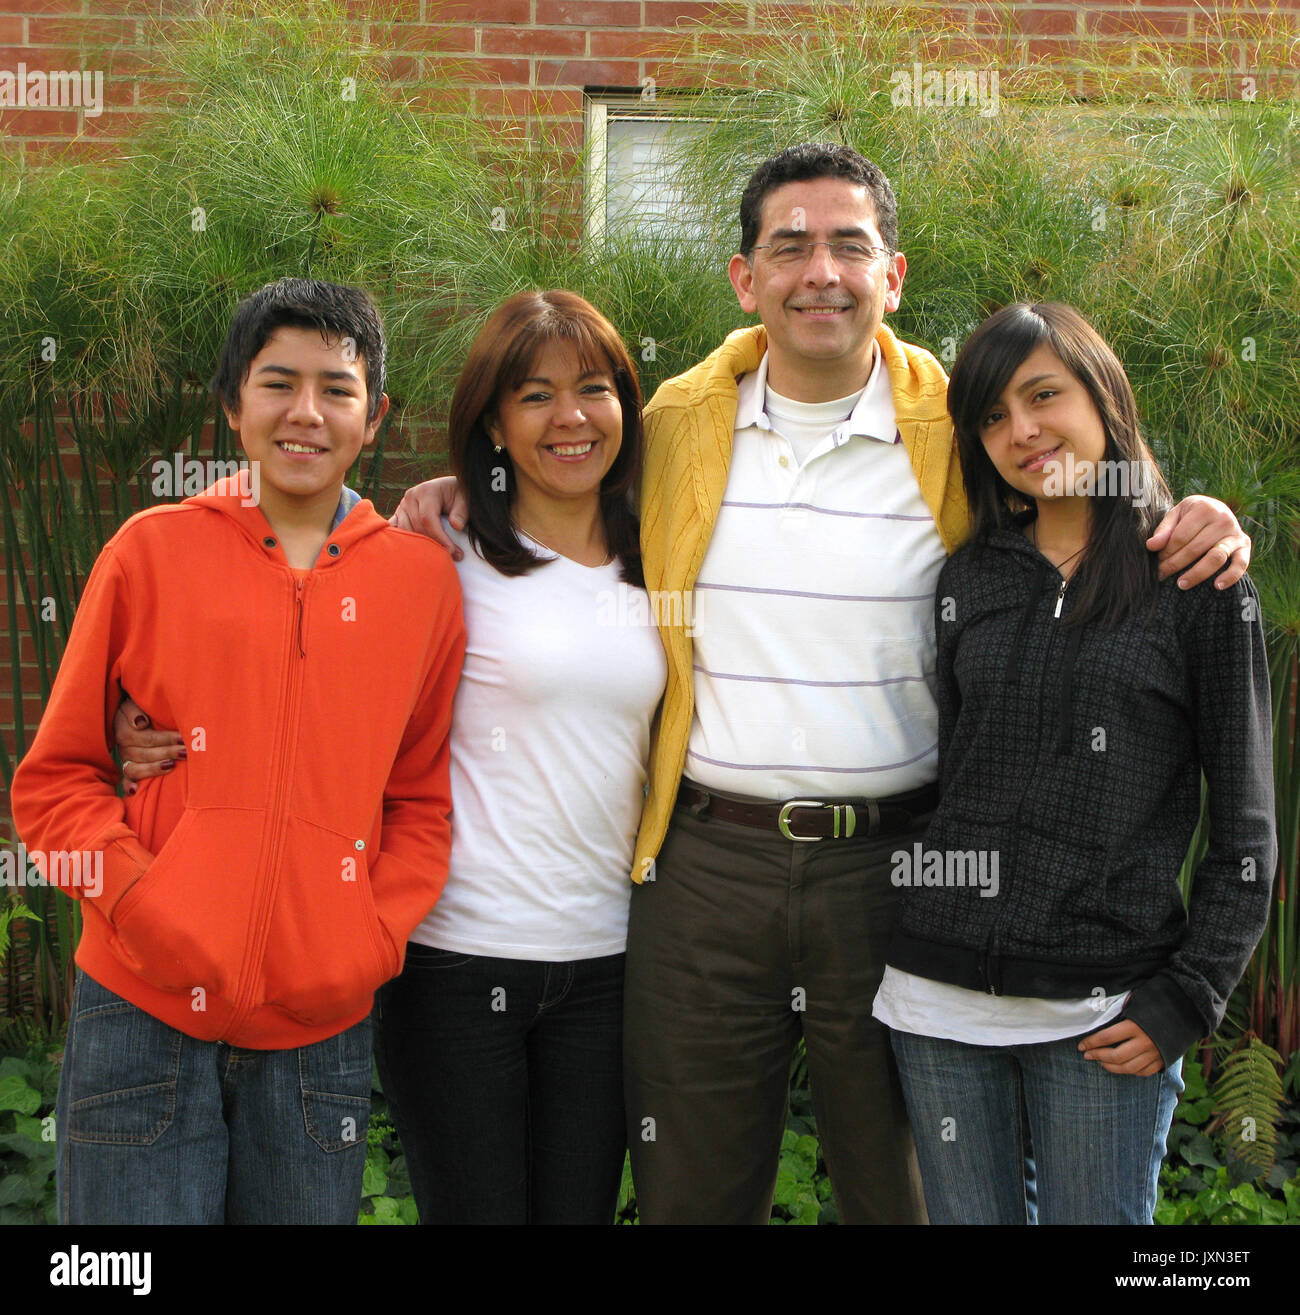 Family from four stands on grass against house Stock Photo